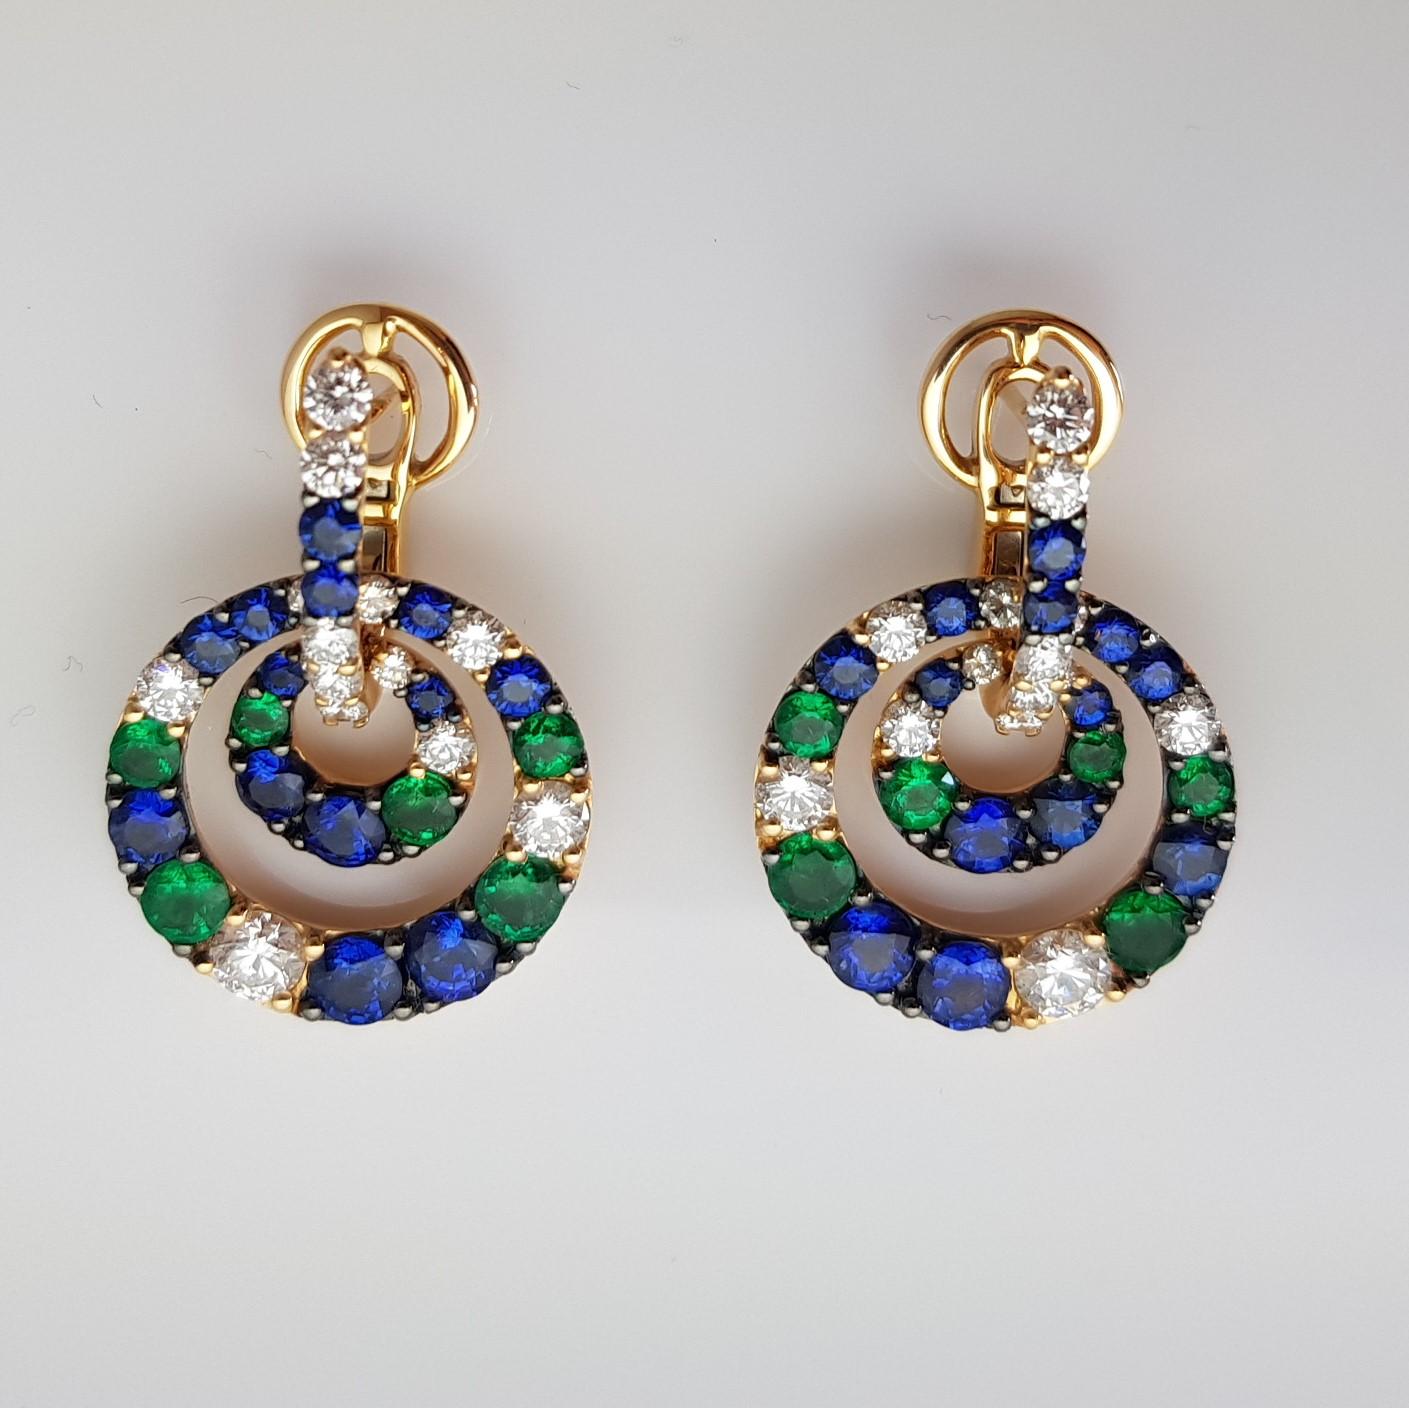 Round Cut 18 Karat Yellow Gold Earrings with Diamonds, Blue Sapphires and Emeralds